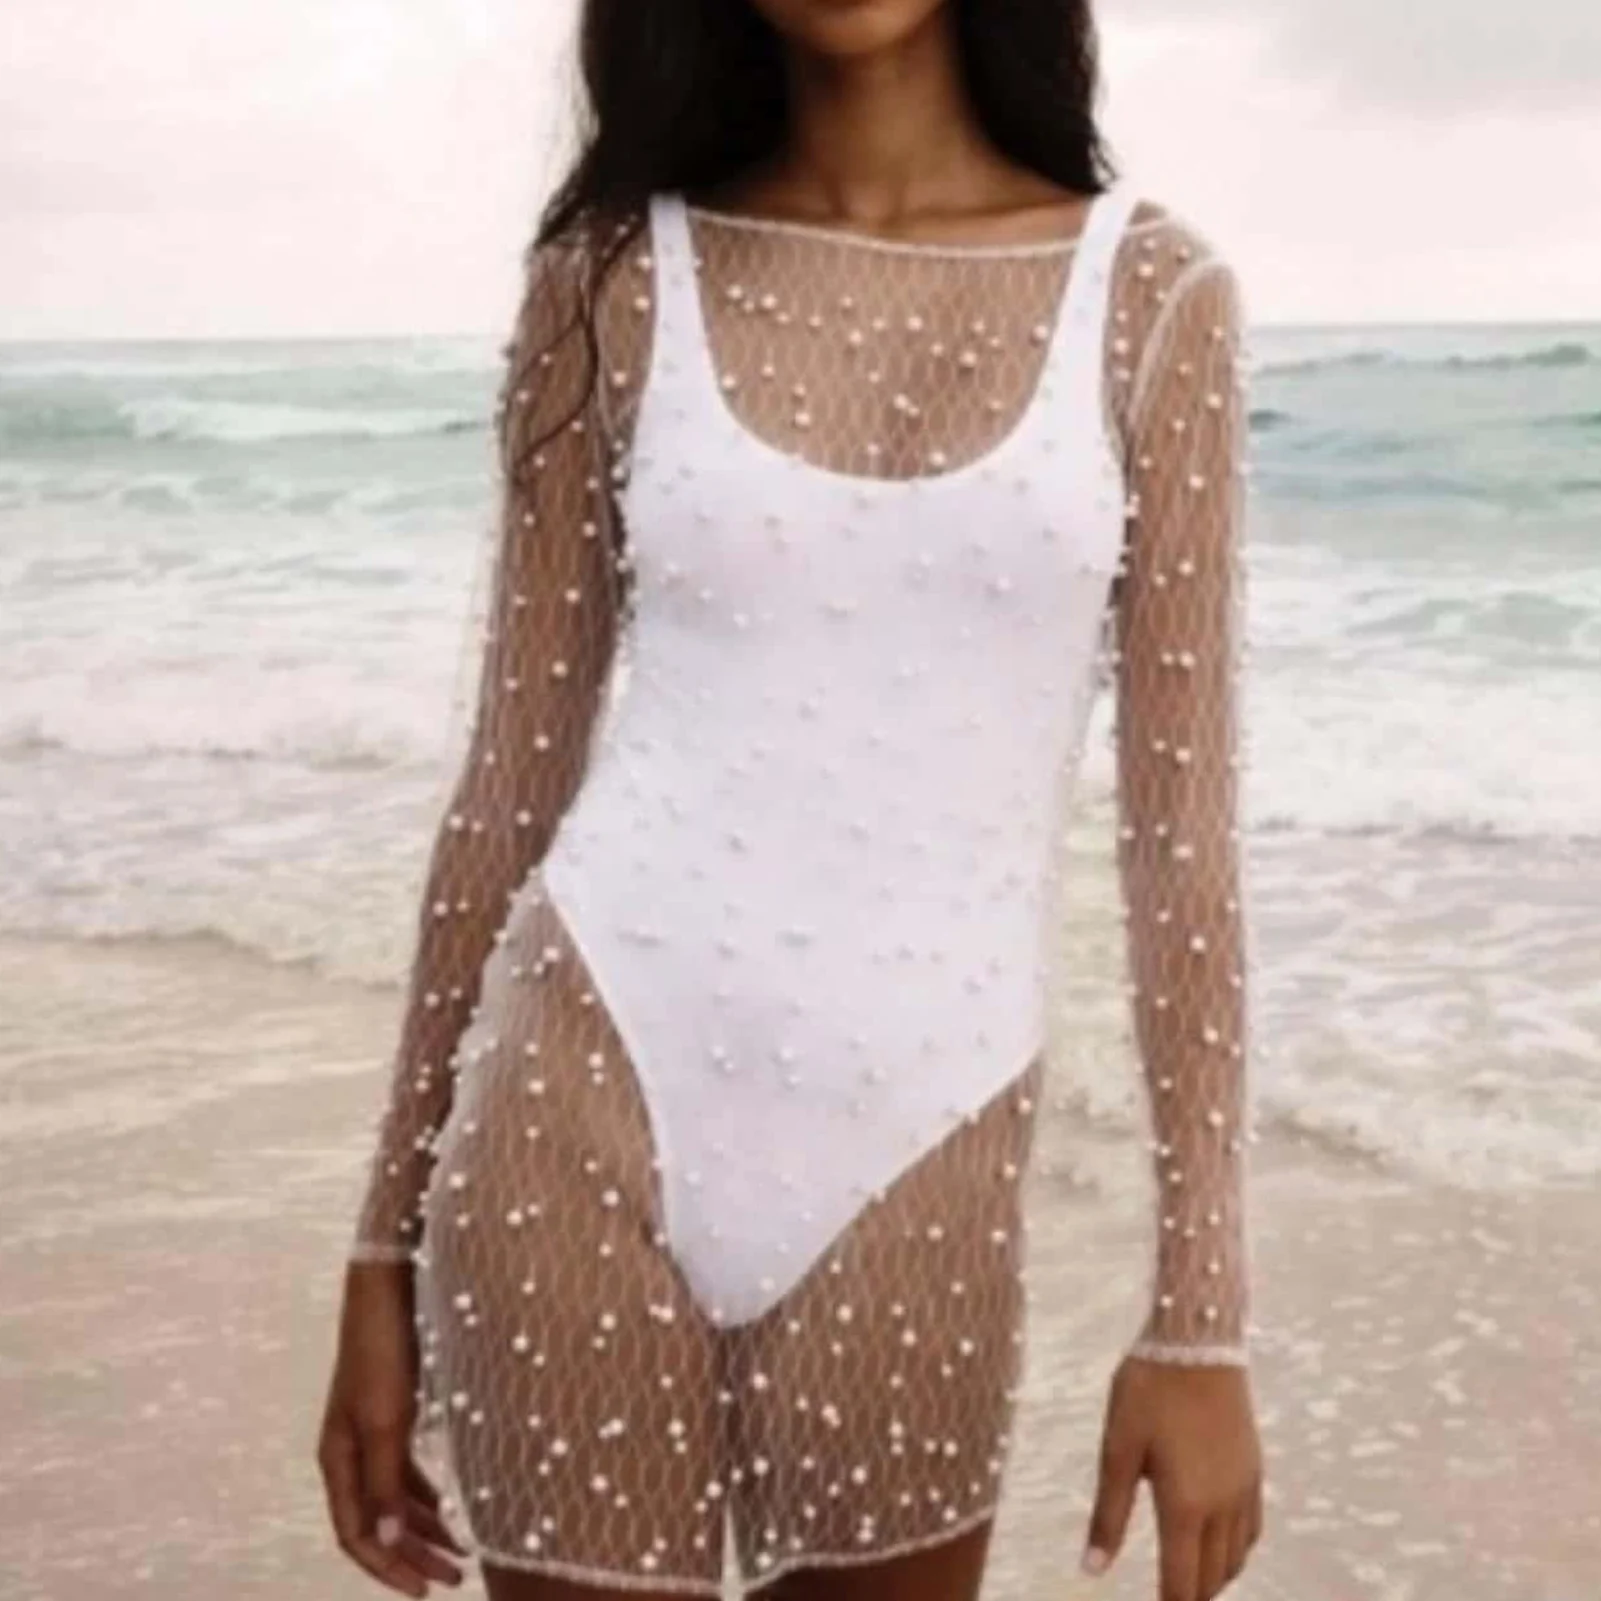 

Pearls Bikini Cover Up Sexy Perspective Beach Coverups Bubble Bead Mesh Long Sleeve See Through European Fashion for Pool Party